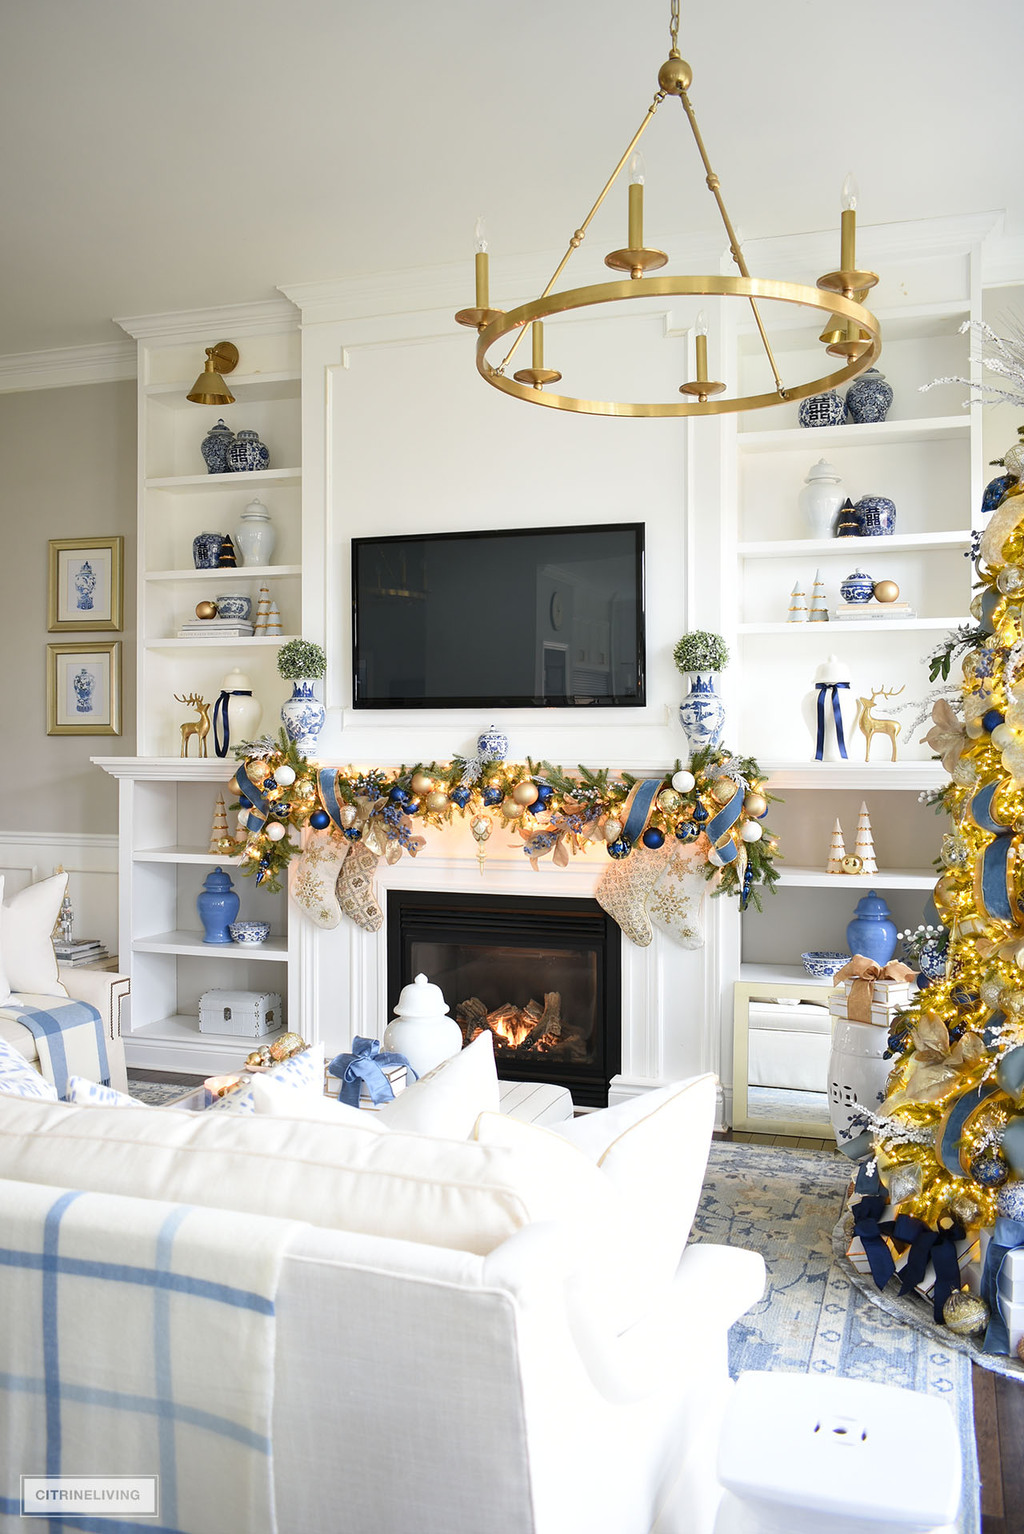 Living room bookshelves and fireplace with a gorgeous swagged garland decorated in elegant blue and gold.